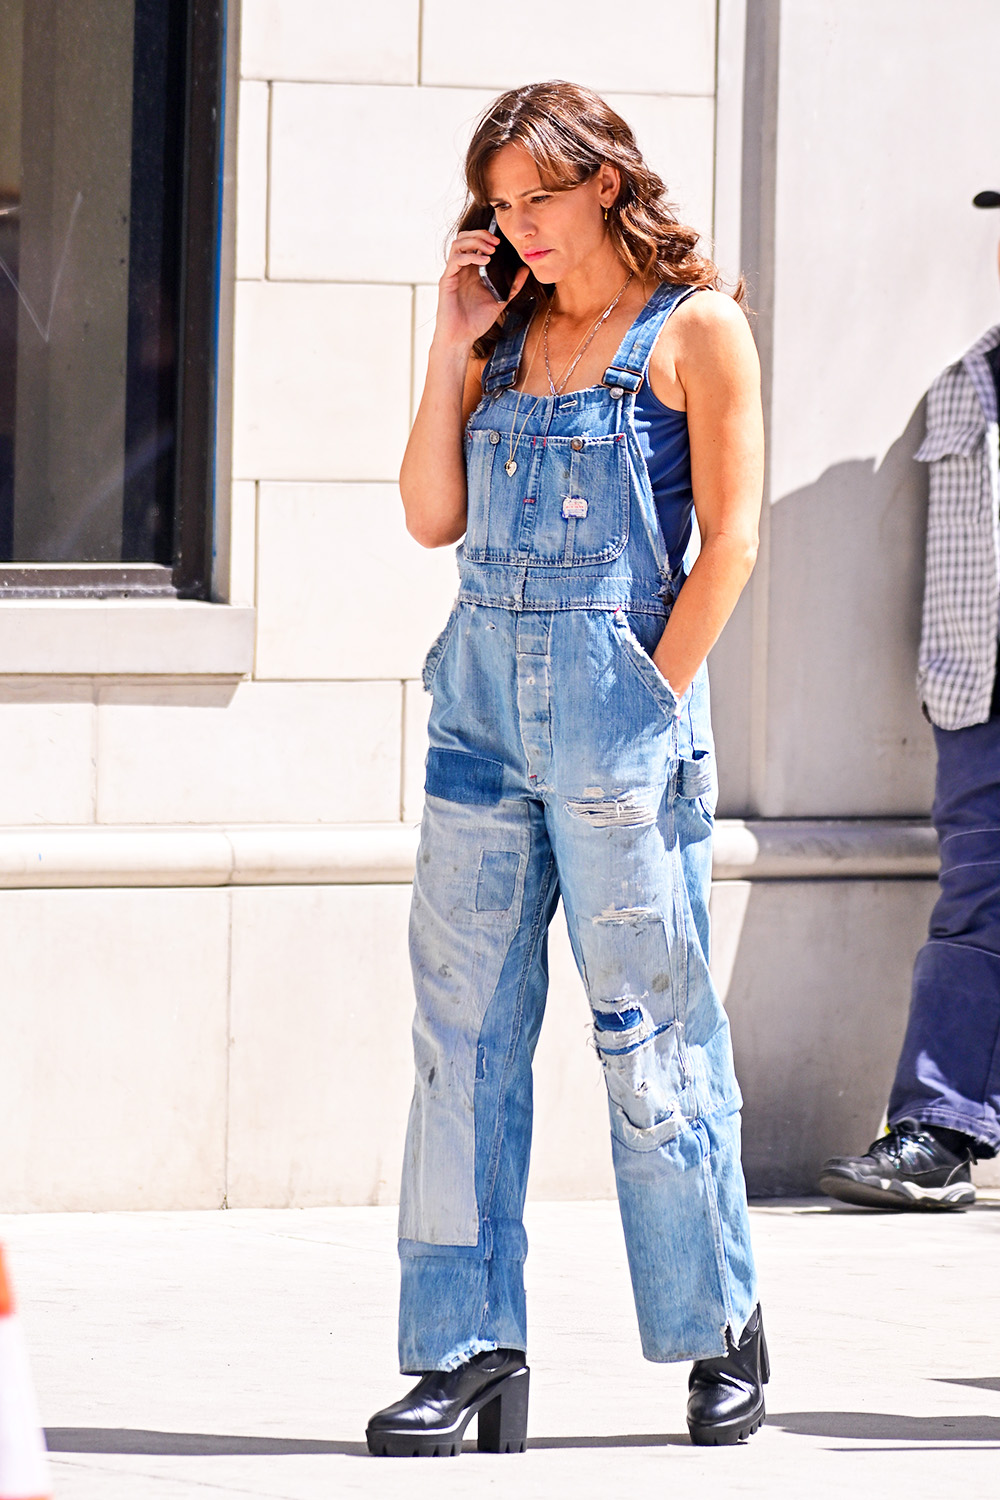 Style a Logo Bra With a Denim Jumpsuit